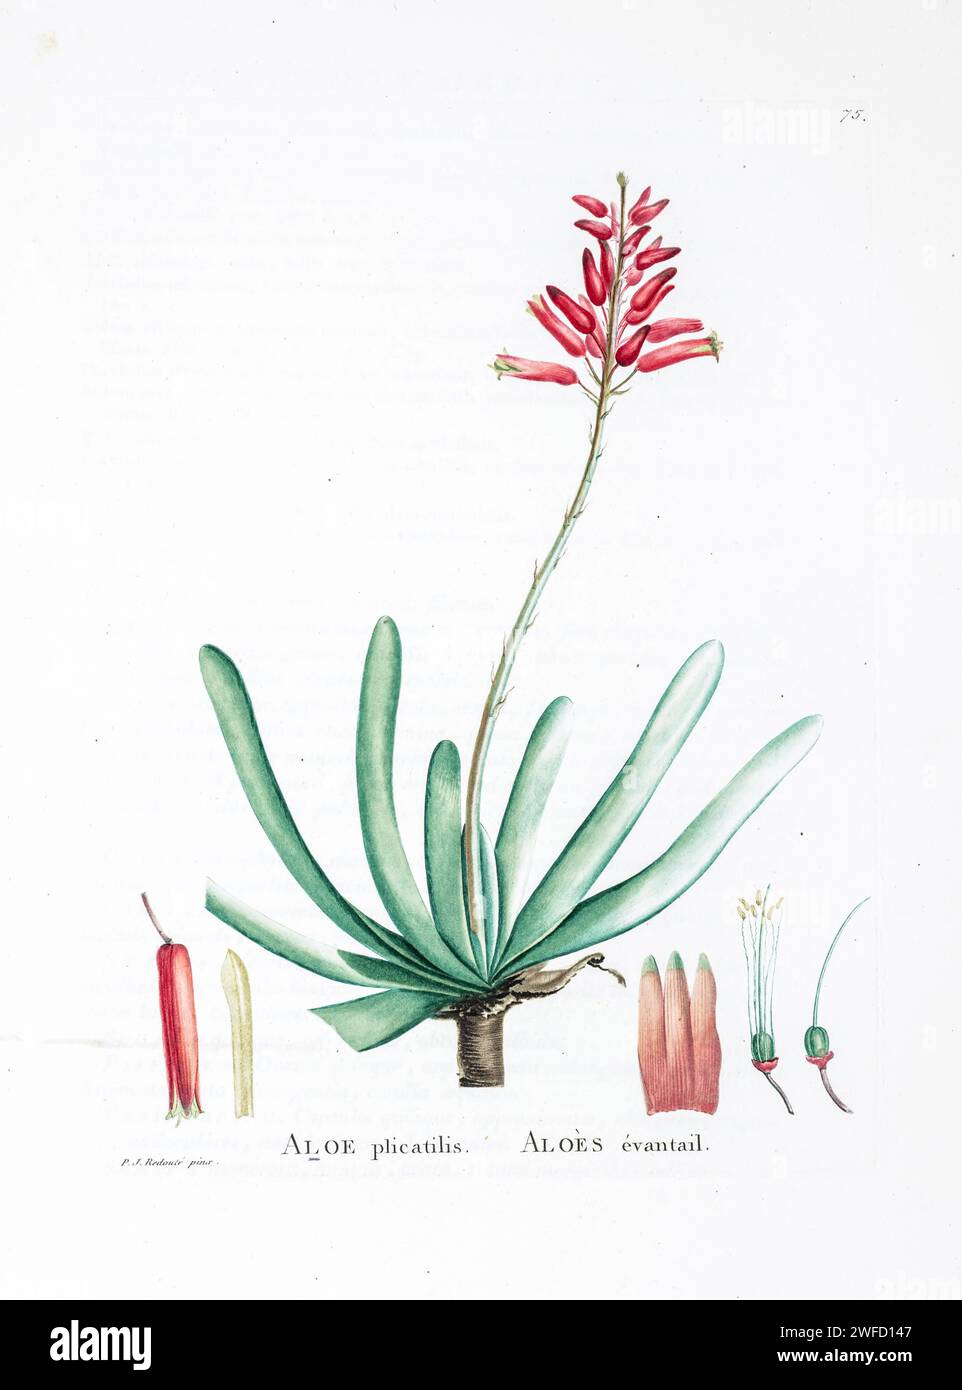 Aloe plicatilis from History of Succulent Plants [Plantarum historia succulentarum / Histoire des plantes grasses] painted by Pierre-Joseph Redouté and described by Augustin Pyramus de Candolle 1799 Kumara plicatilis, formerly Aloe plicatilis, the fan-aloe, is a succulent plant endemic to a few mountains in the Fynbos ecoregion, of the Western Cape in South Africa. The plant has an unusual and striking fan-like arrangement of its leaves. Stock Photo